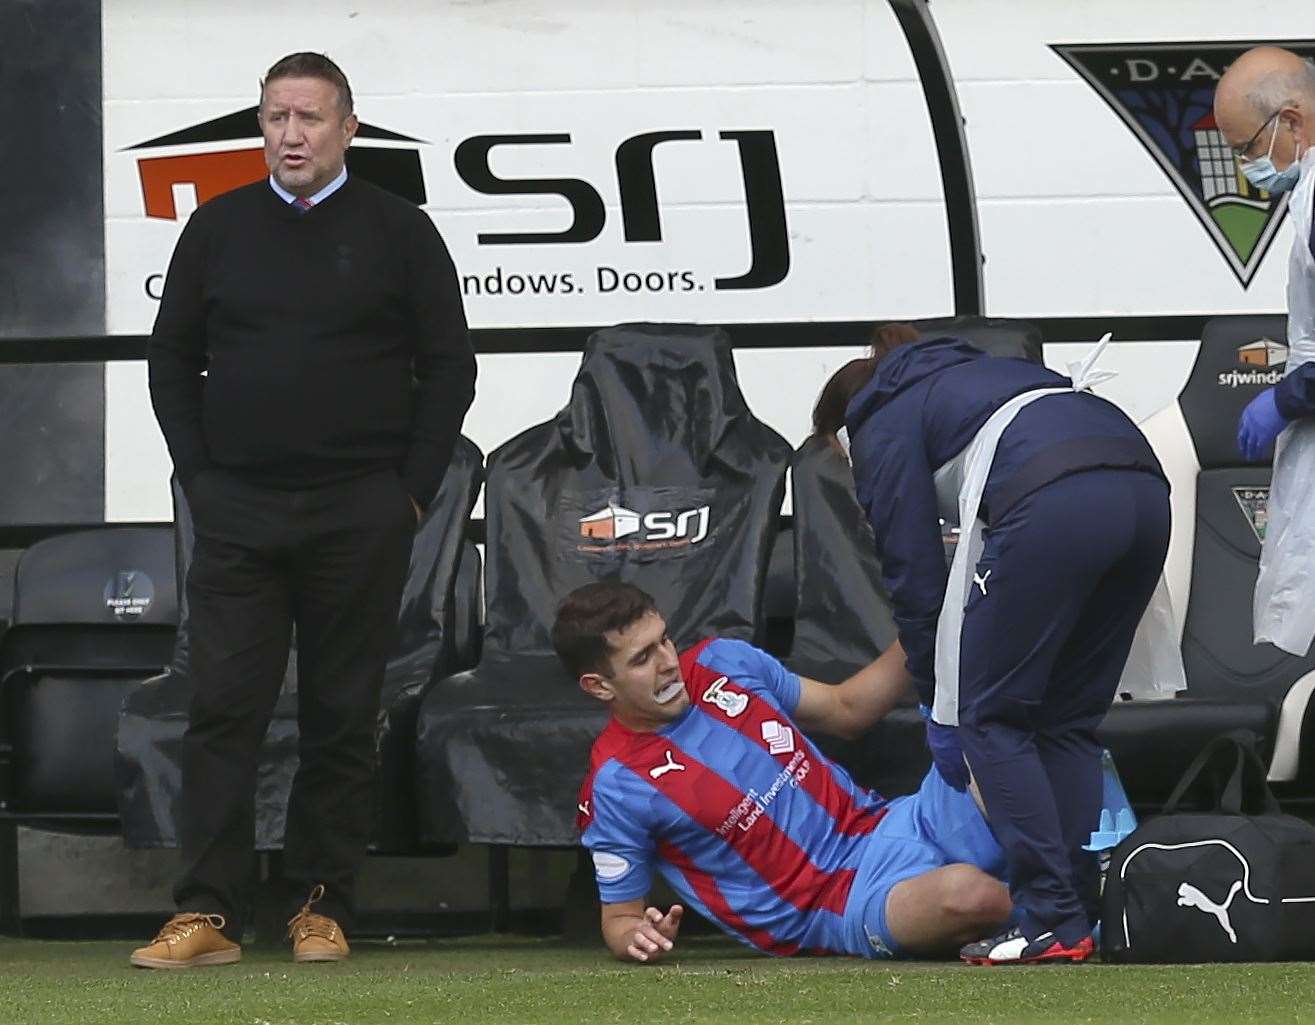 Picture - Ken Macpherson, Inverness. Dunfermline(3) v Inverness CT(1). 17.10.20. ICT’s Nickolay Todorov is treated for his injury as manager John Robertson contemplates playing the game without his only striker.